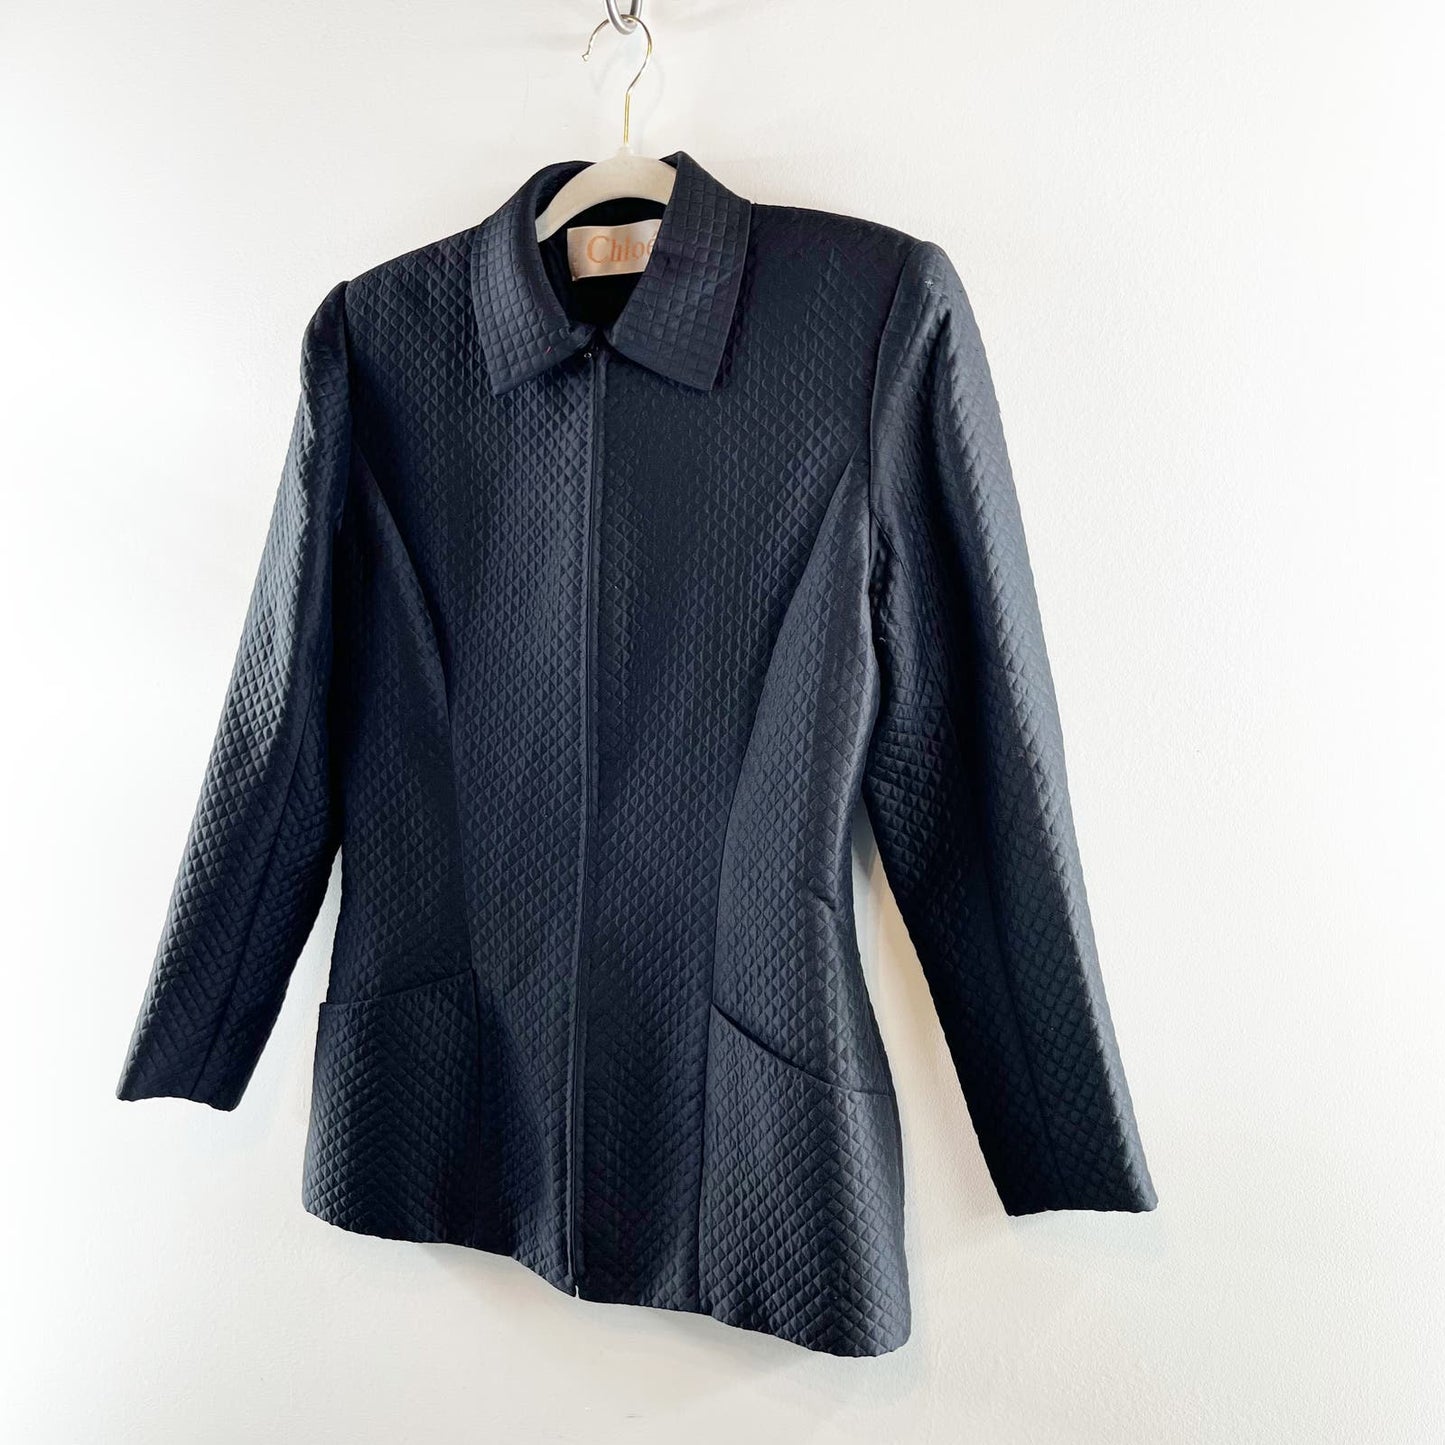 Chloe Zip Up Quilted Blazer Jacket Coat Lined Black Small